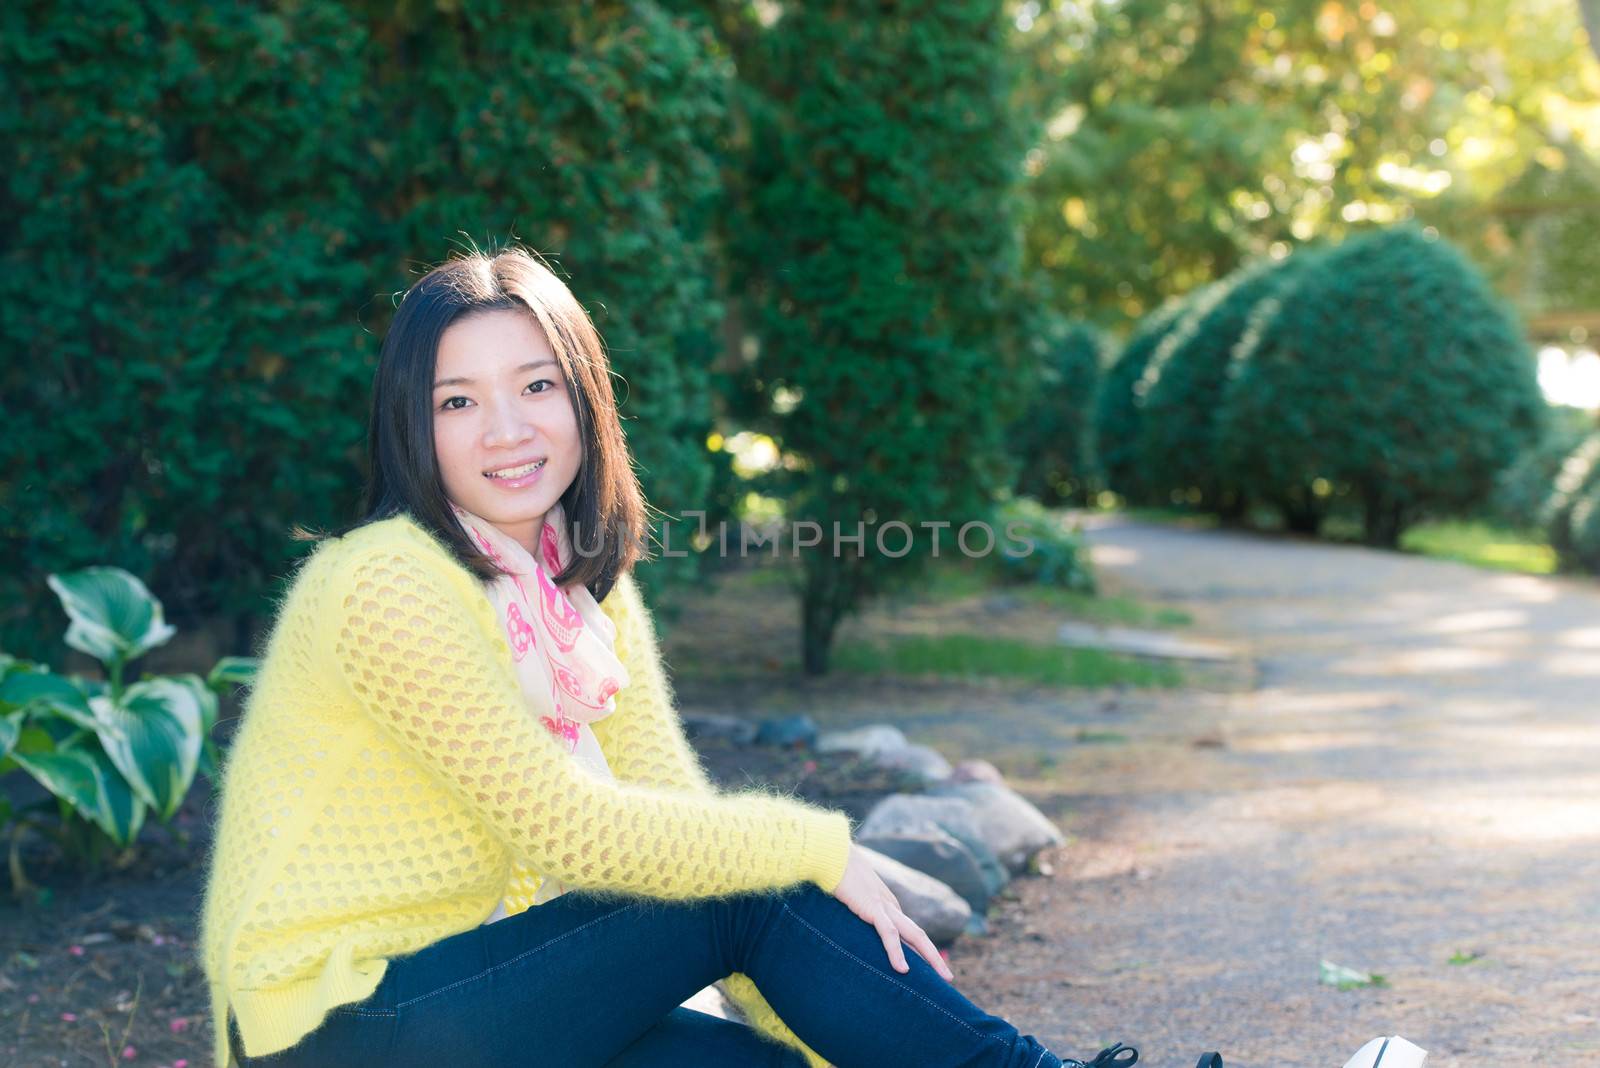 Young woman sitting next to a road looking happy